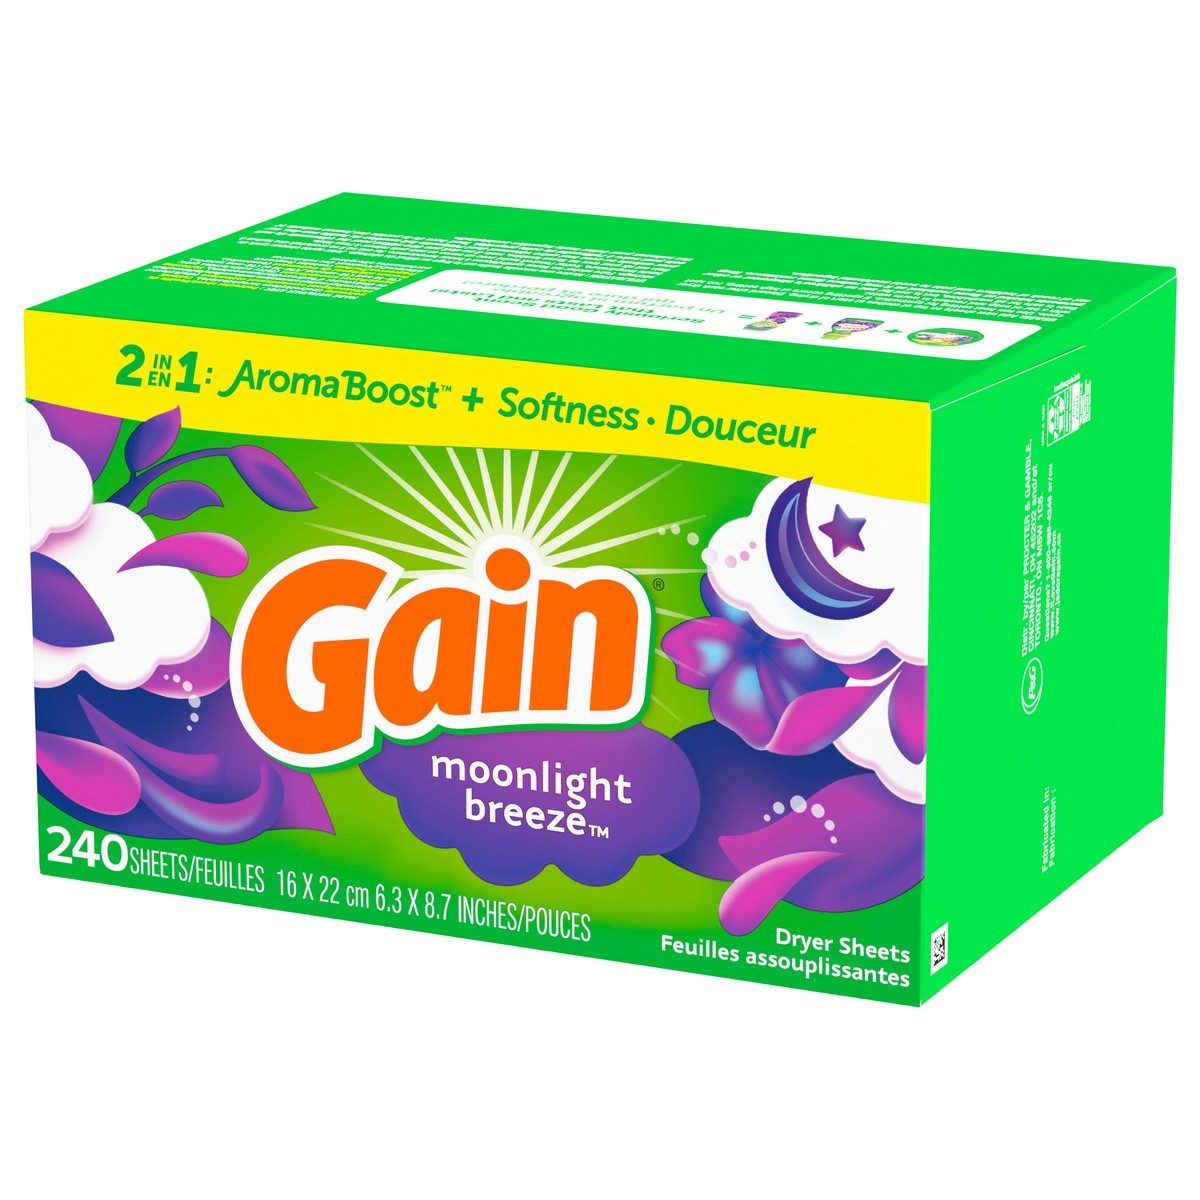 slide 2 of 12, Gain dryer sheets, 240 Count, Moonlight Breeze Scent Laundry Fabric Softener Sheets with 2-in-1 Aromaboost Plus Softness, 240 ct